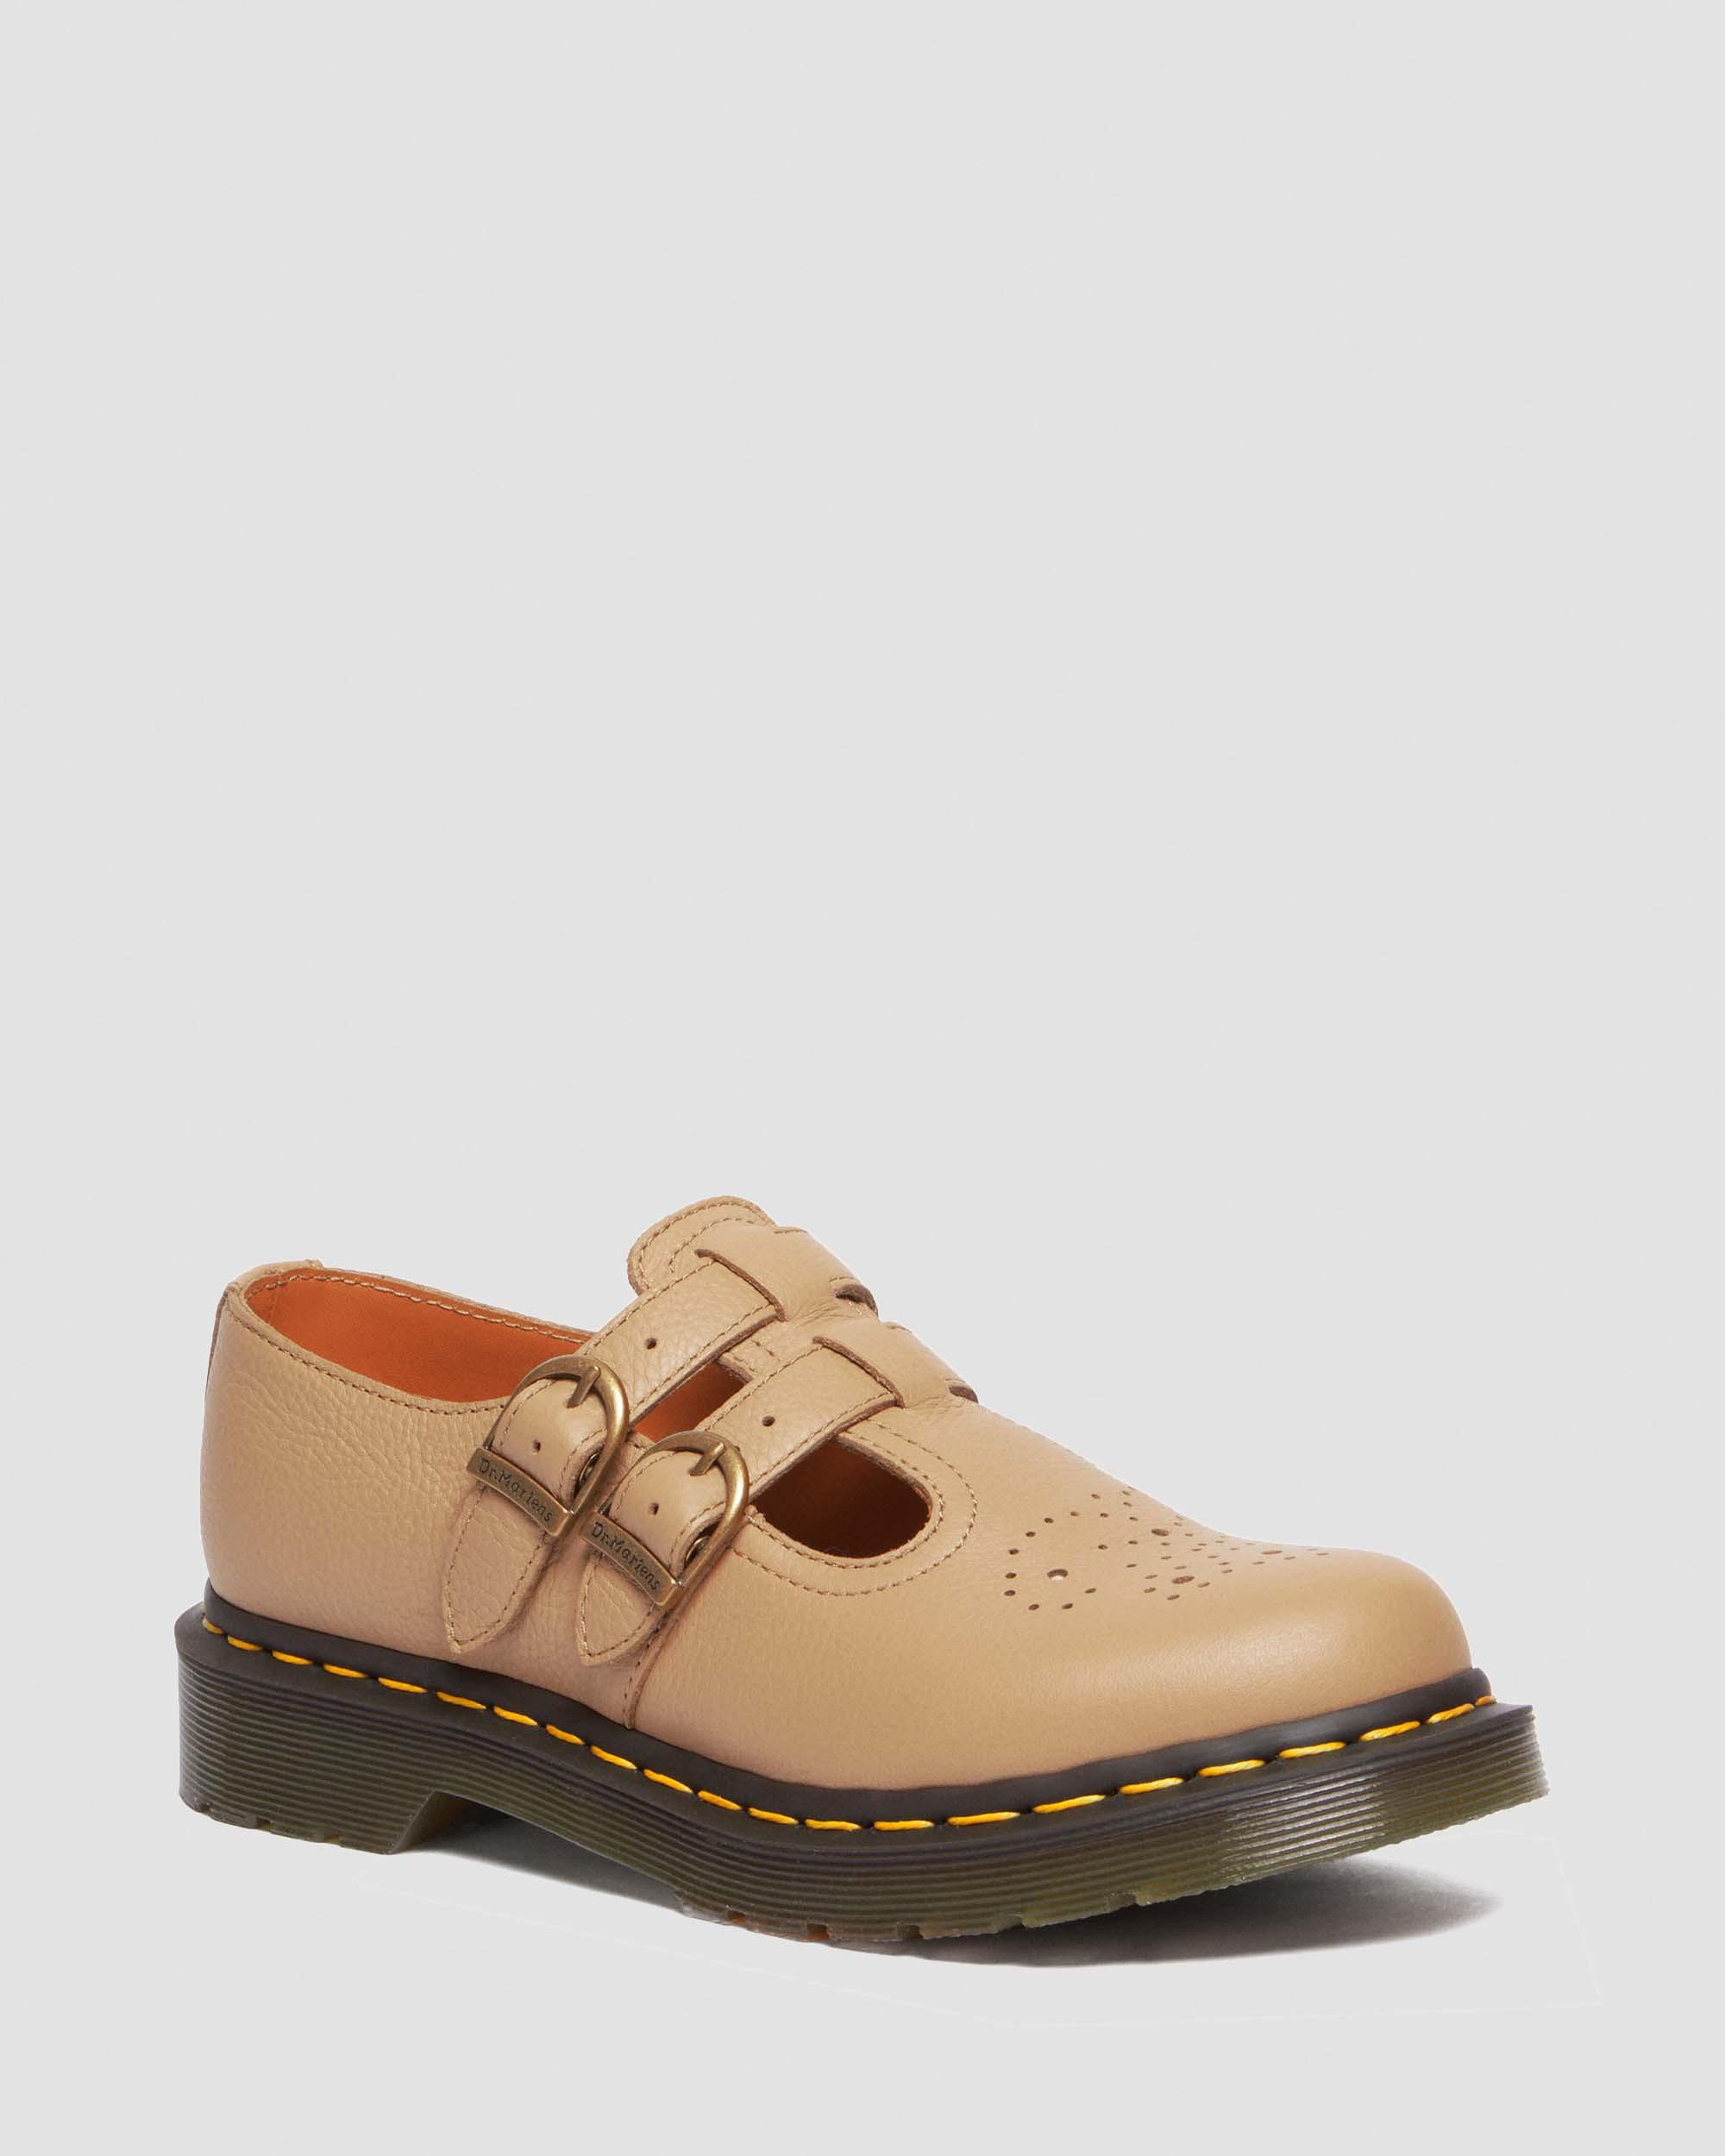 8065 Mary Jane Virginia Leather Shoes in Savannah Tan